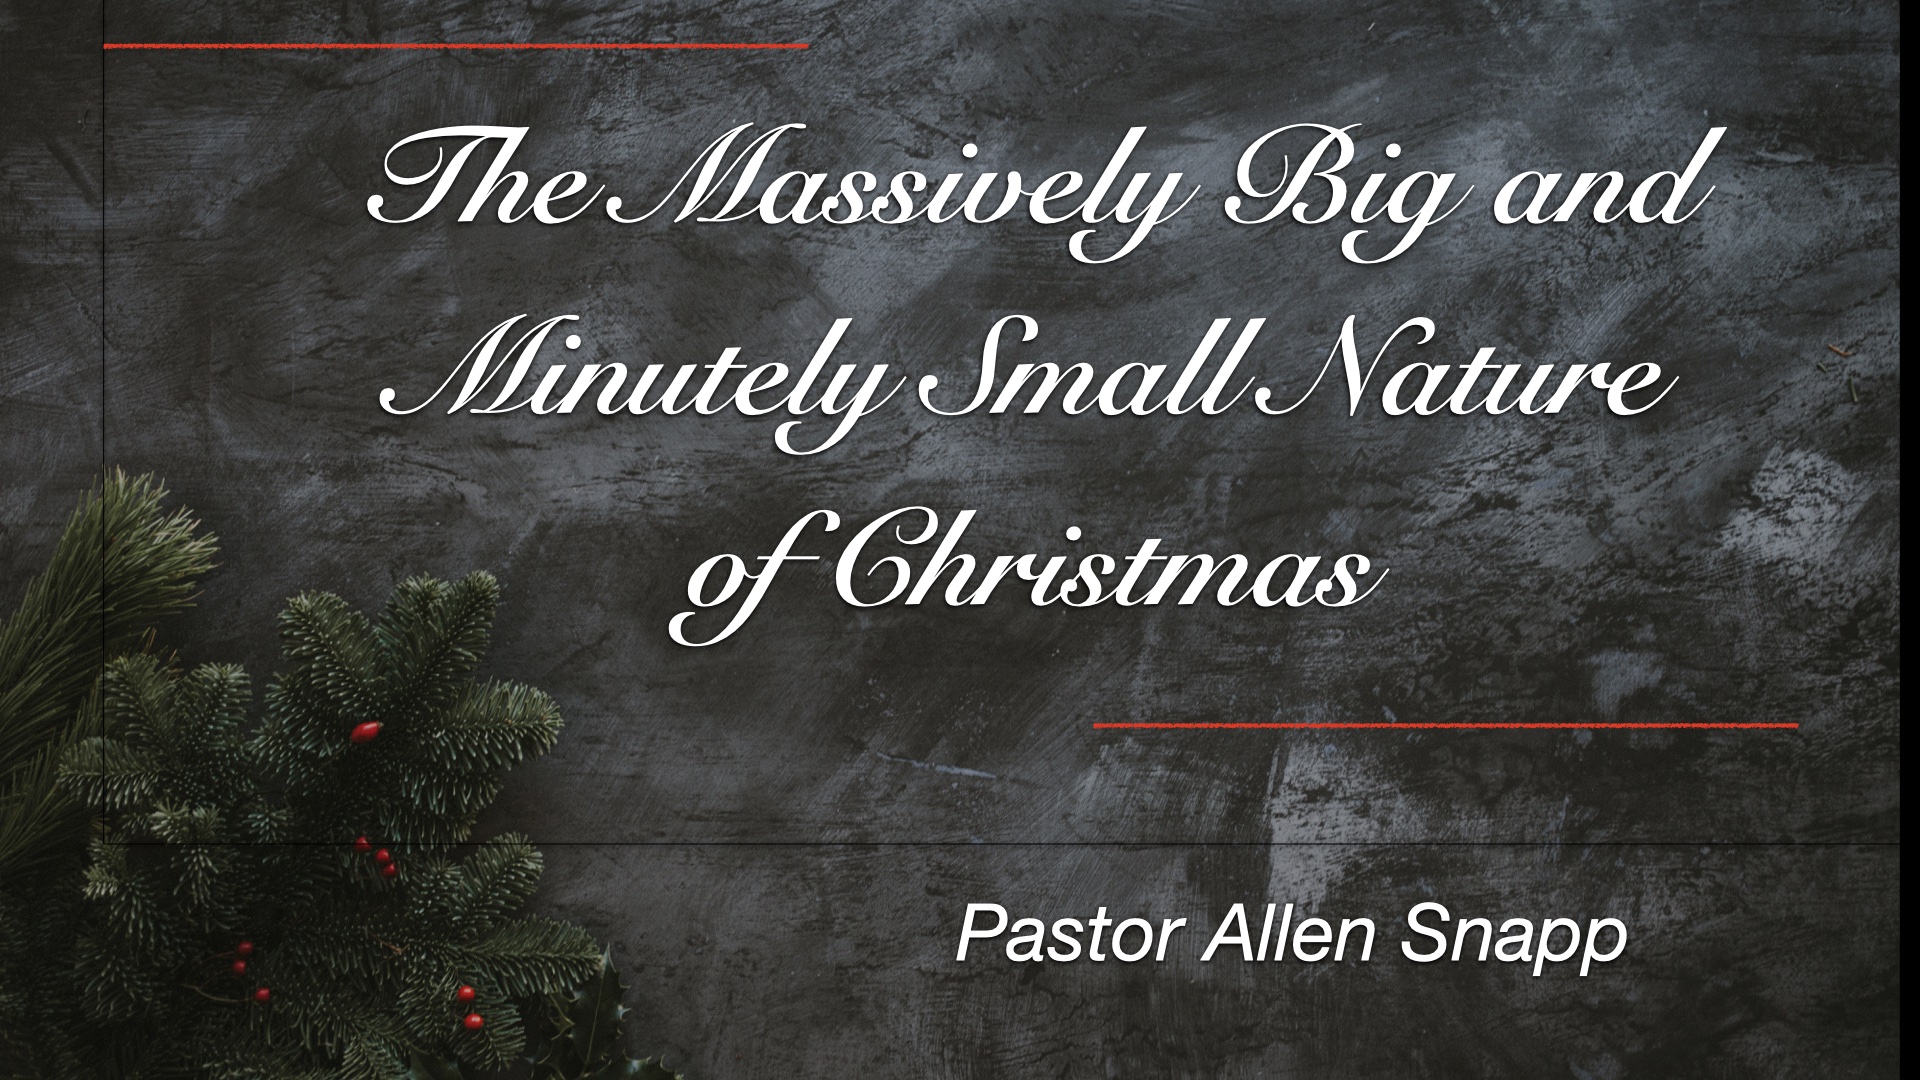 The Massively Big and Minutely Small Nature of Christmas banner